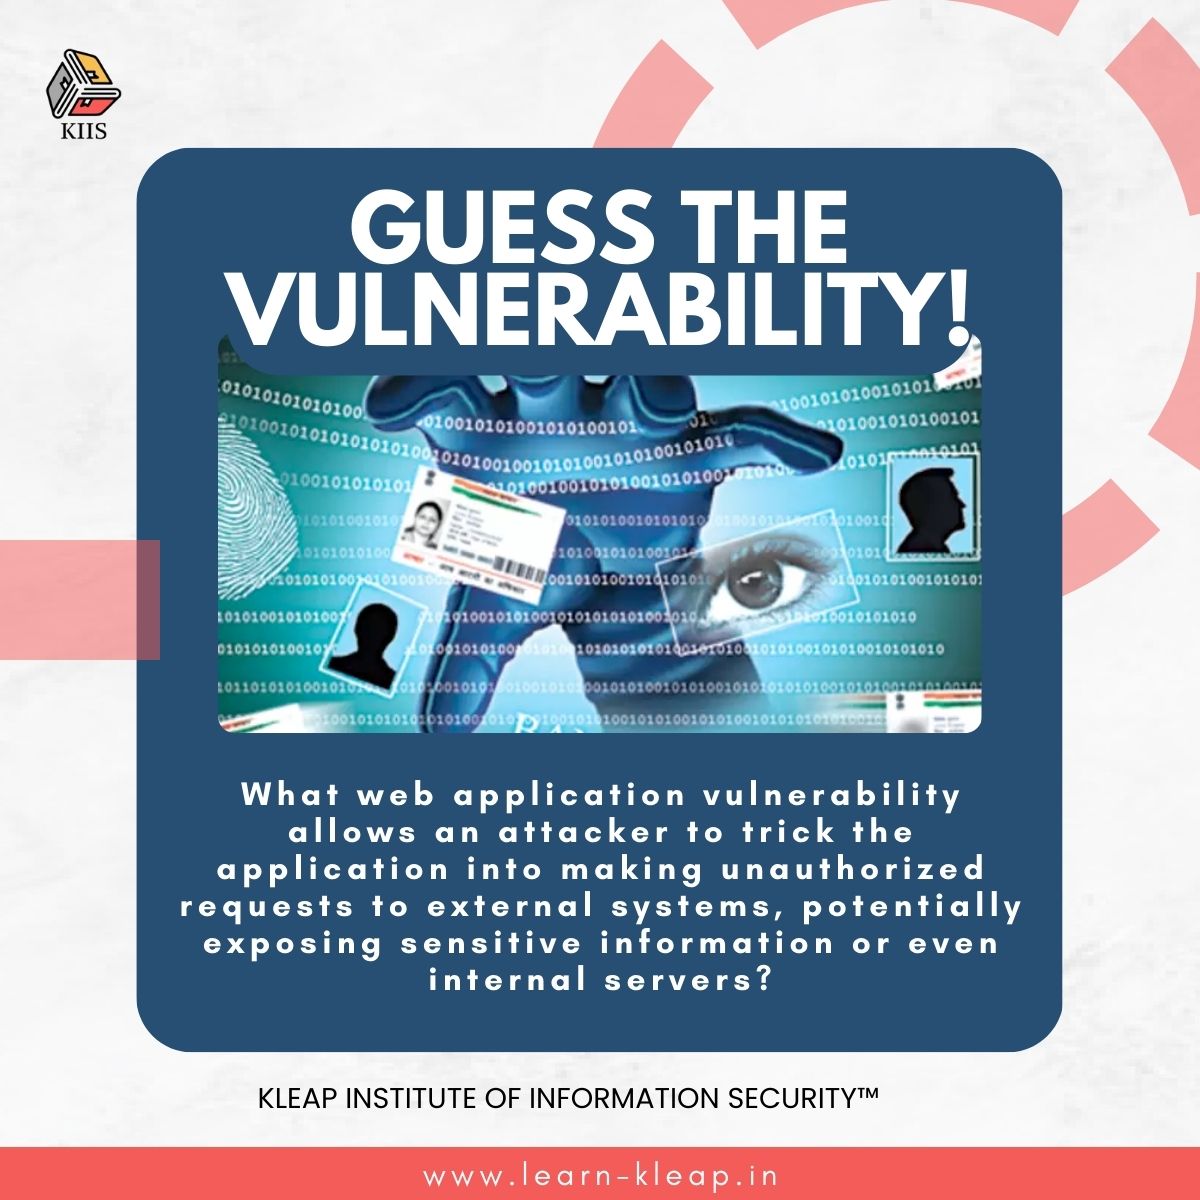 Guess the Vulnerability! 

Write your answer in the comment box!

#vulnerability #vapt #ransomwareattack #malware #kleap #vapt #cybersecurity #cyberattacks